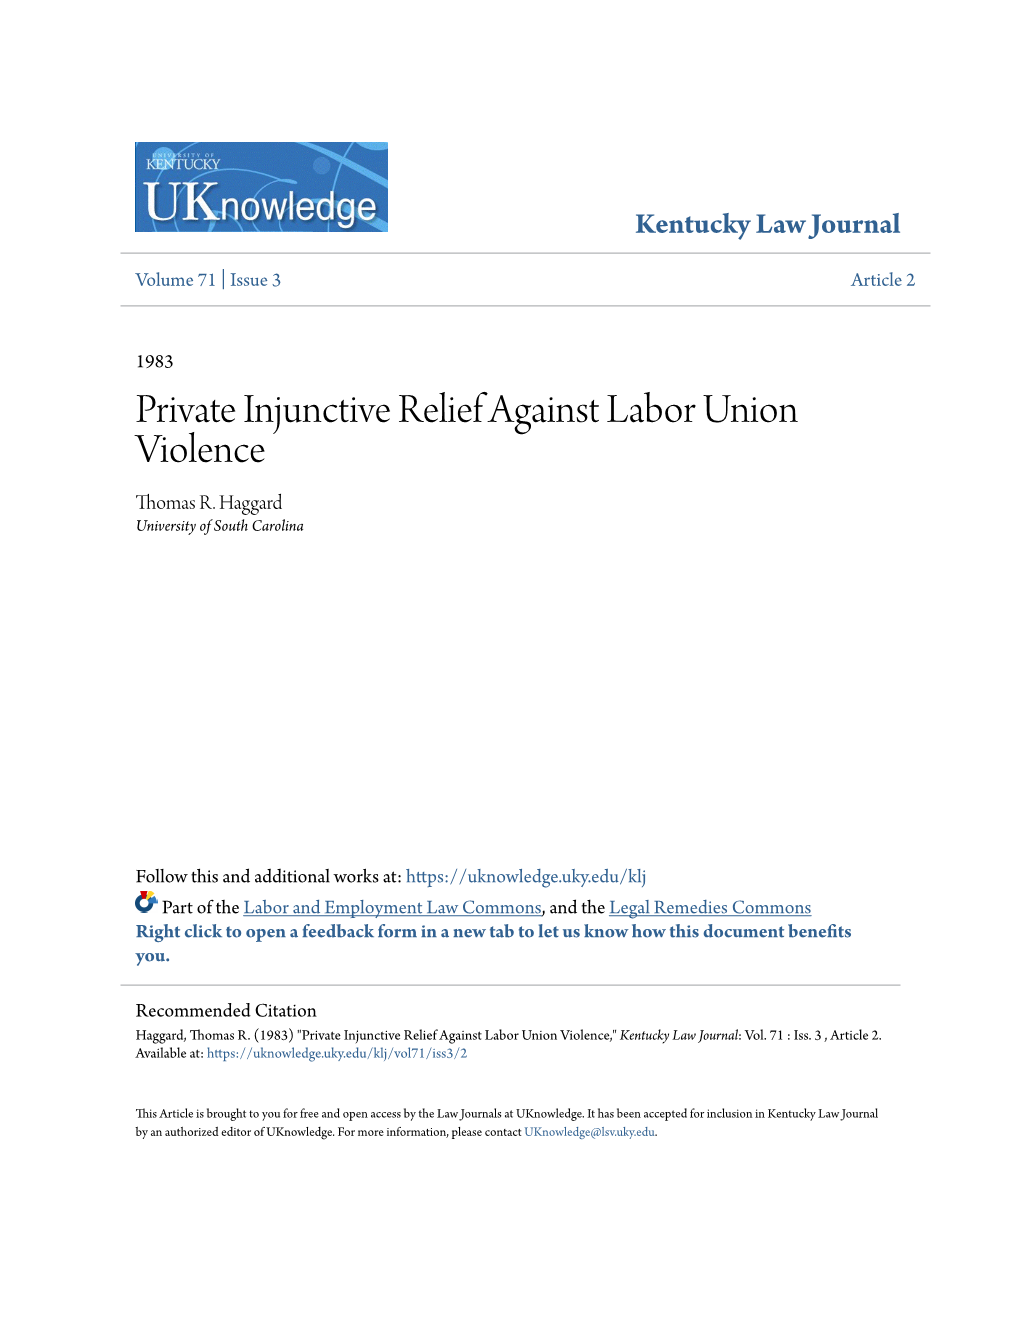 Private Injunctive Relief Against Labor Union Violence Thomas R